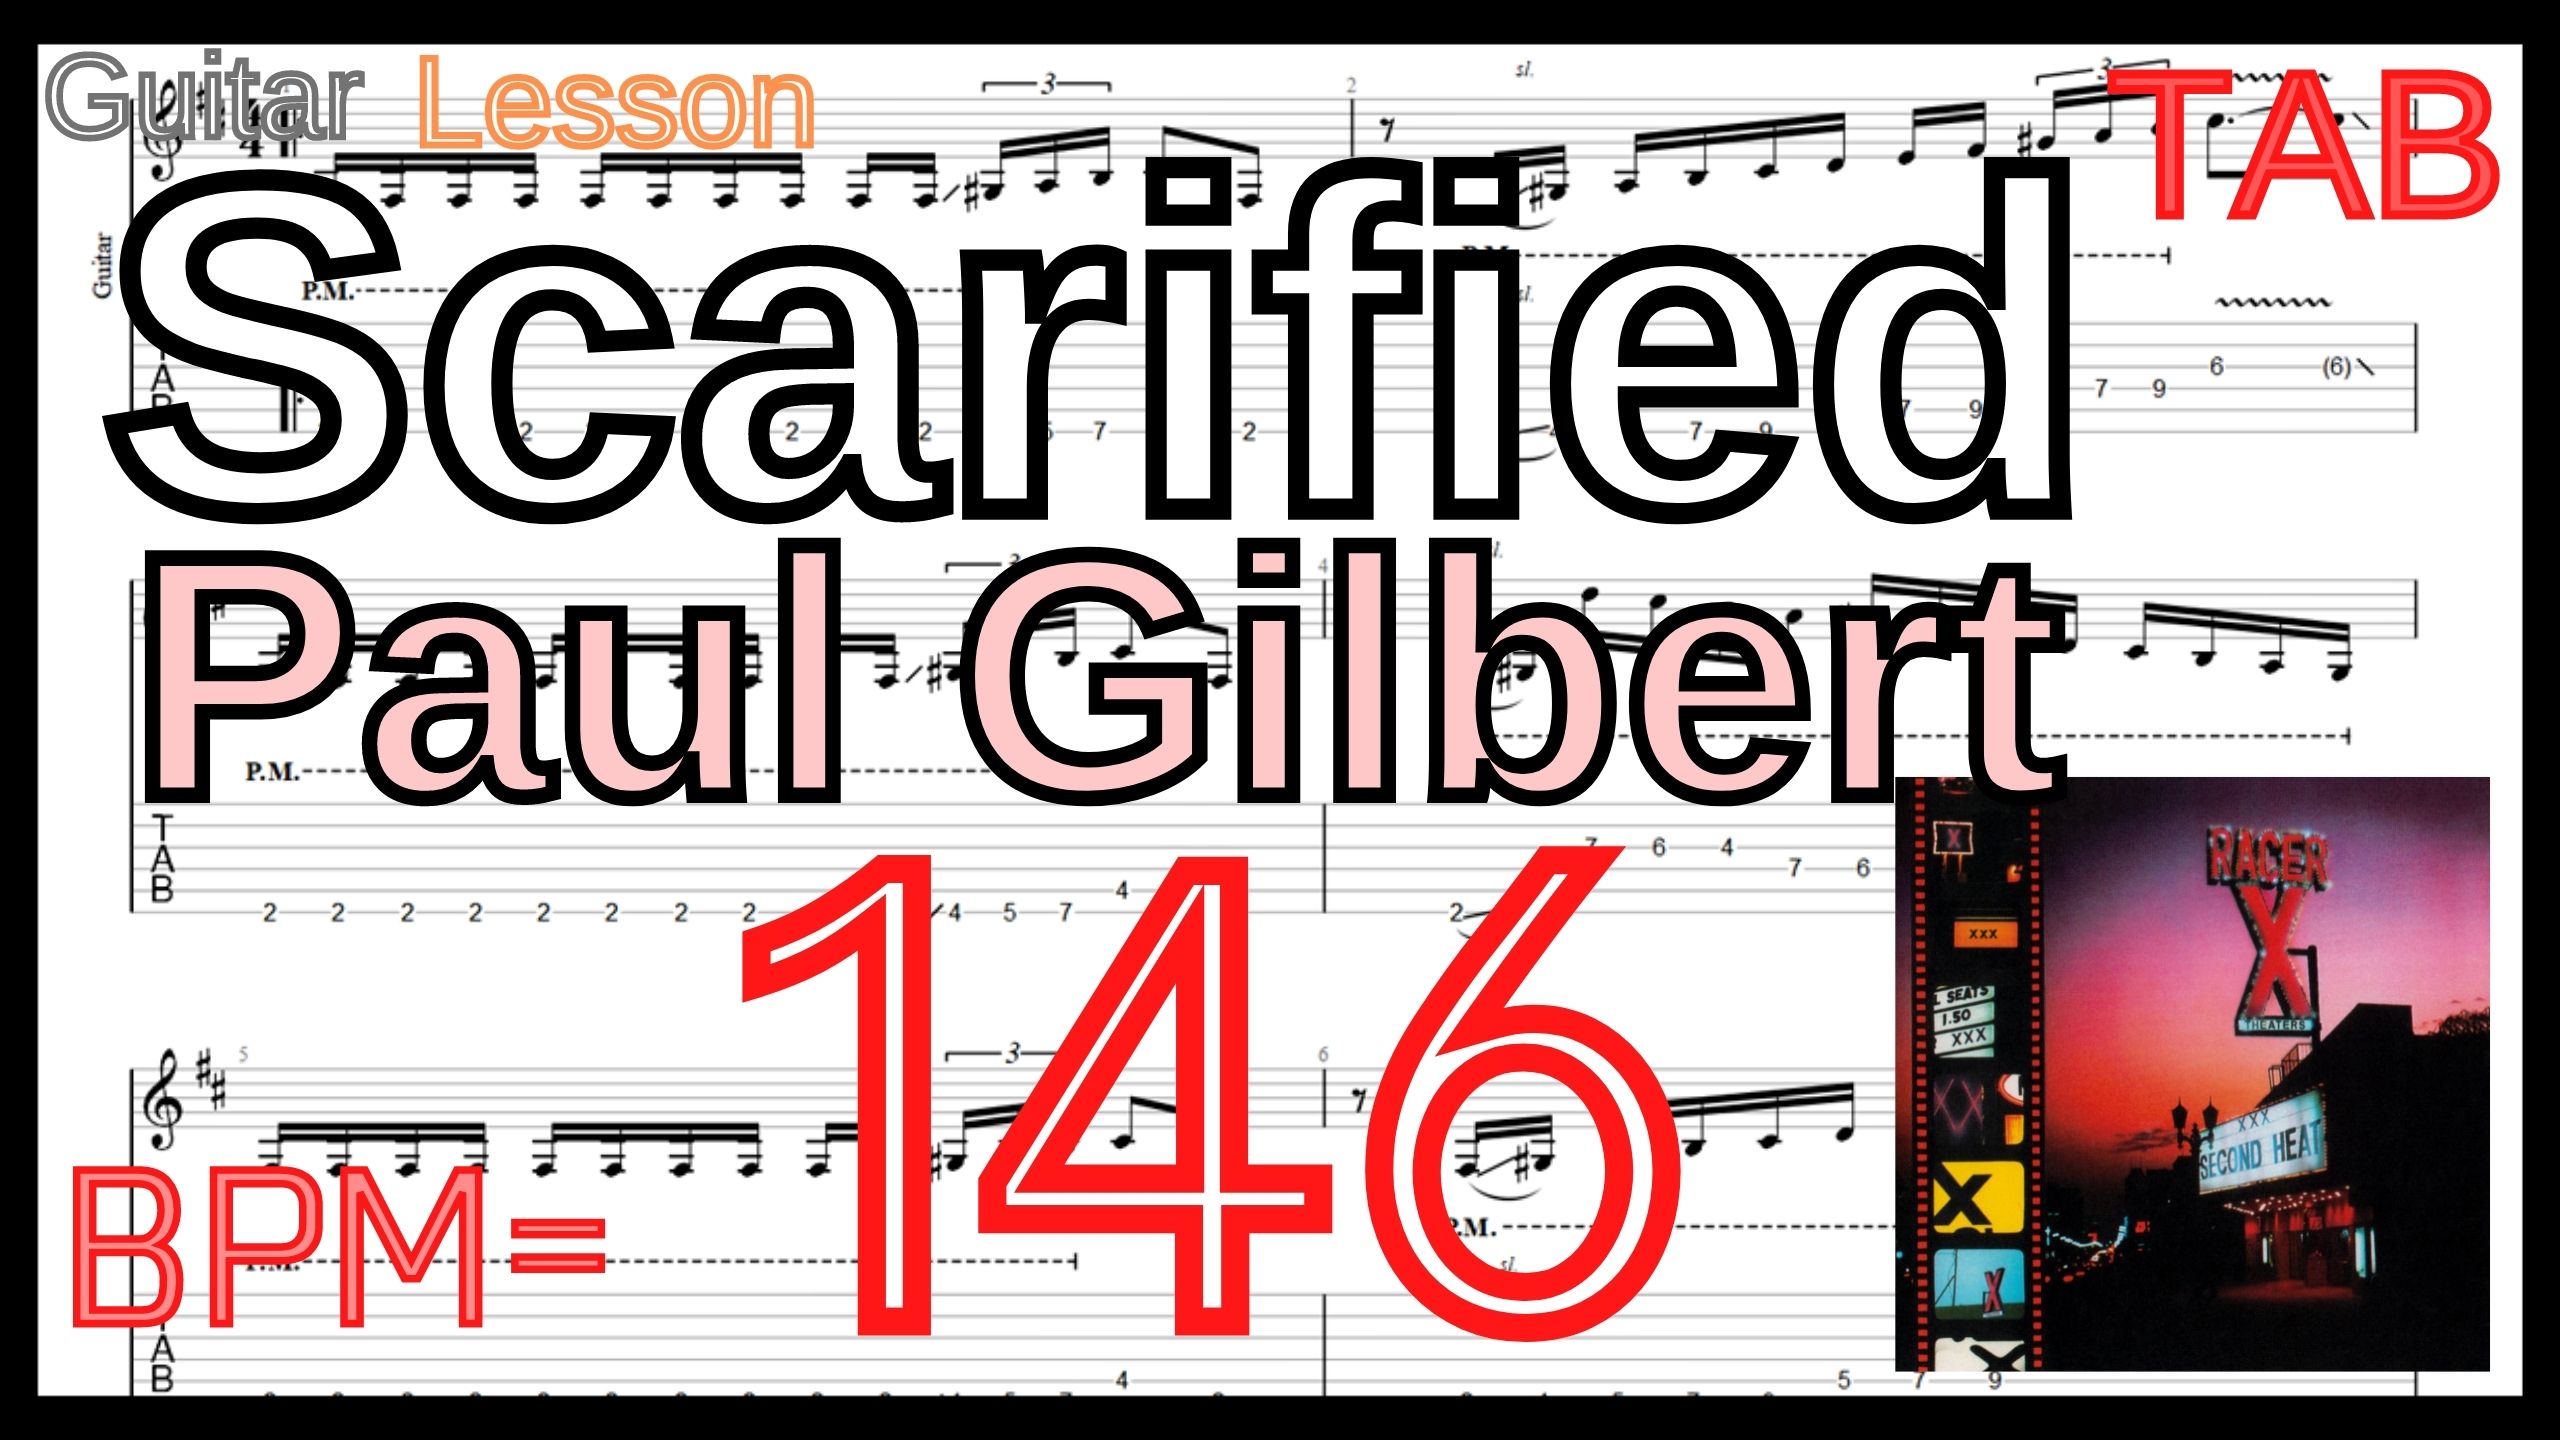 Guitar Picking Best Practice TAB6.Scarified / Paul Gilbert(Racer X) Guitar Lesson ギター ポール･ギルバート